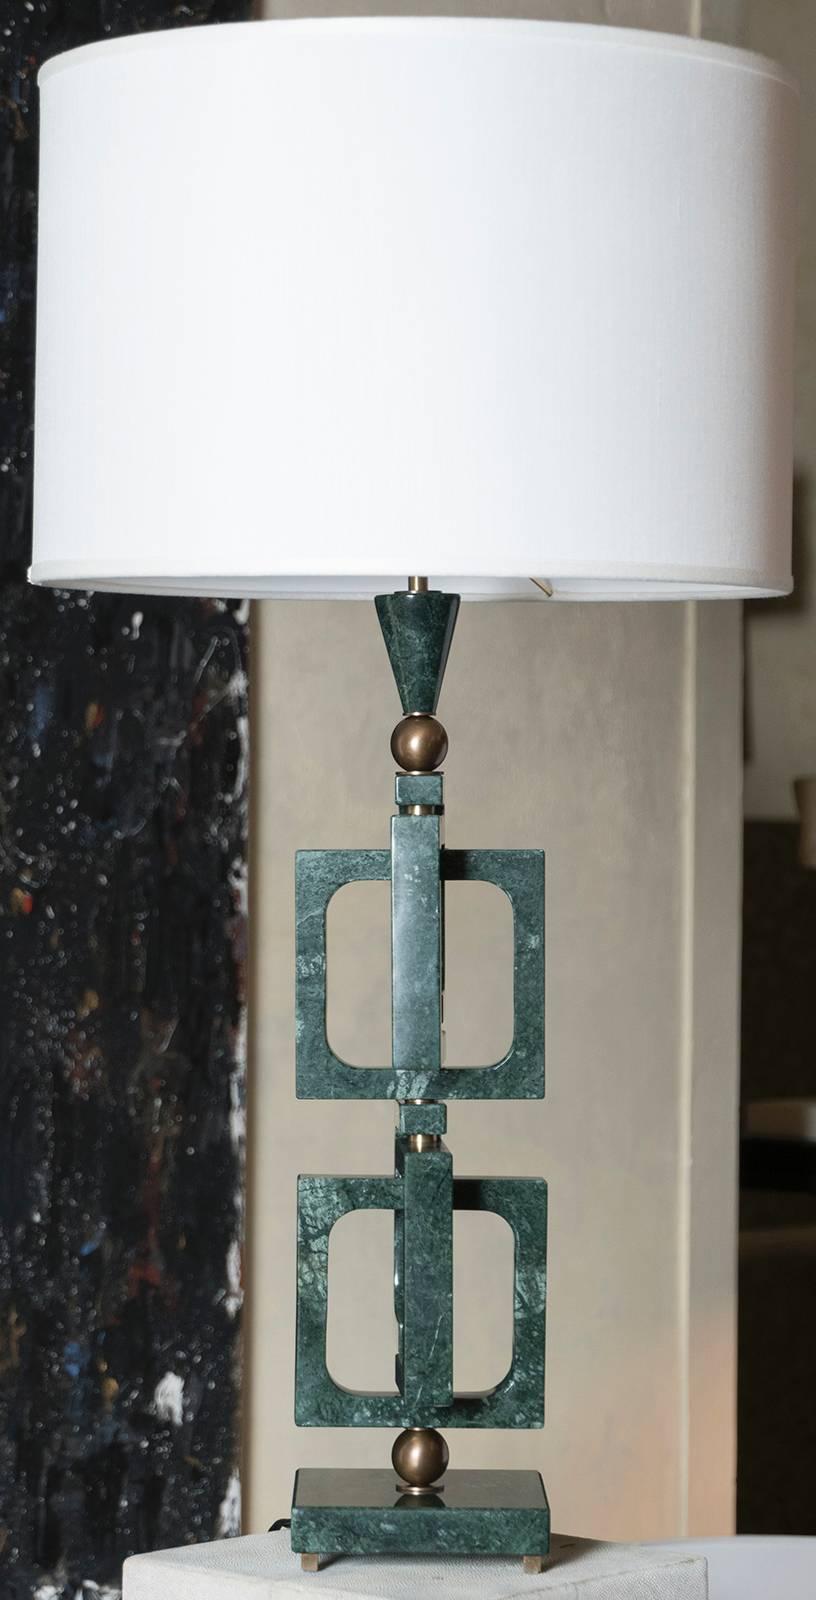 Sculptural lamp realized in Verde Guatemala marble with bronze details, also available in Nero Maquinia marble and Travertine Stone, lampshade cm 45x H.30, total high lampshade included cm 89.